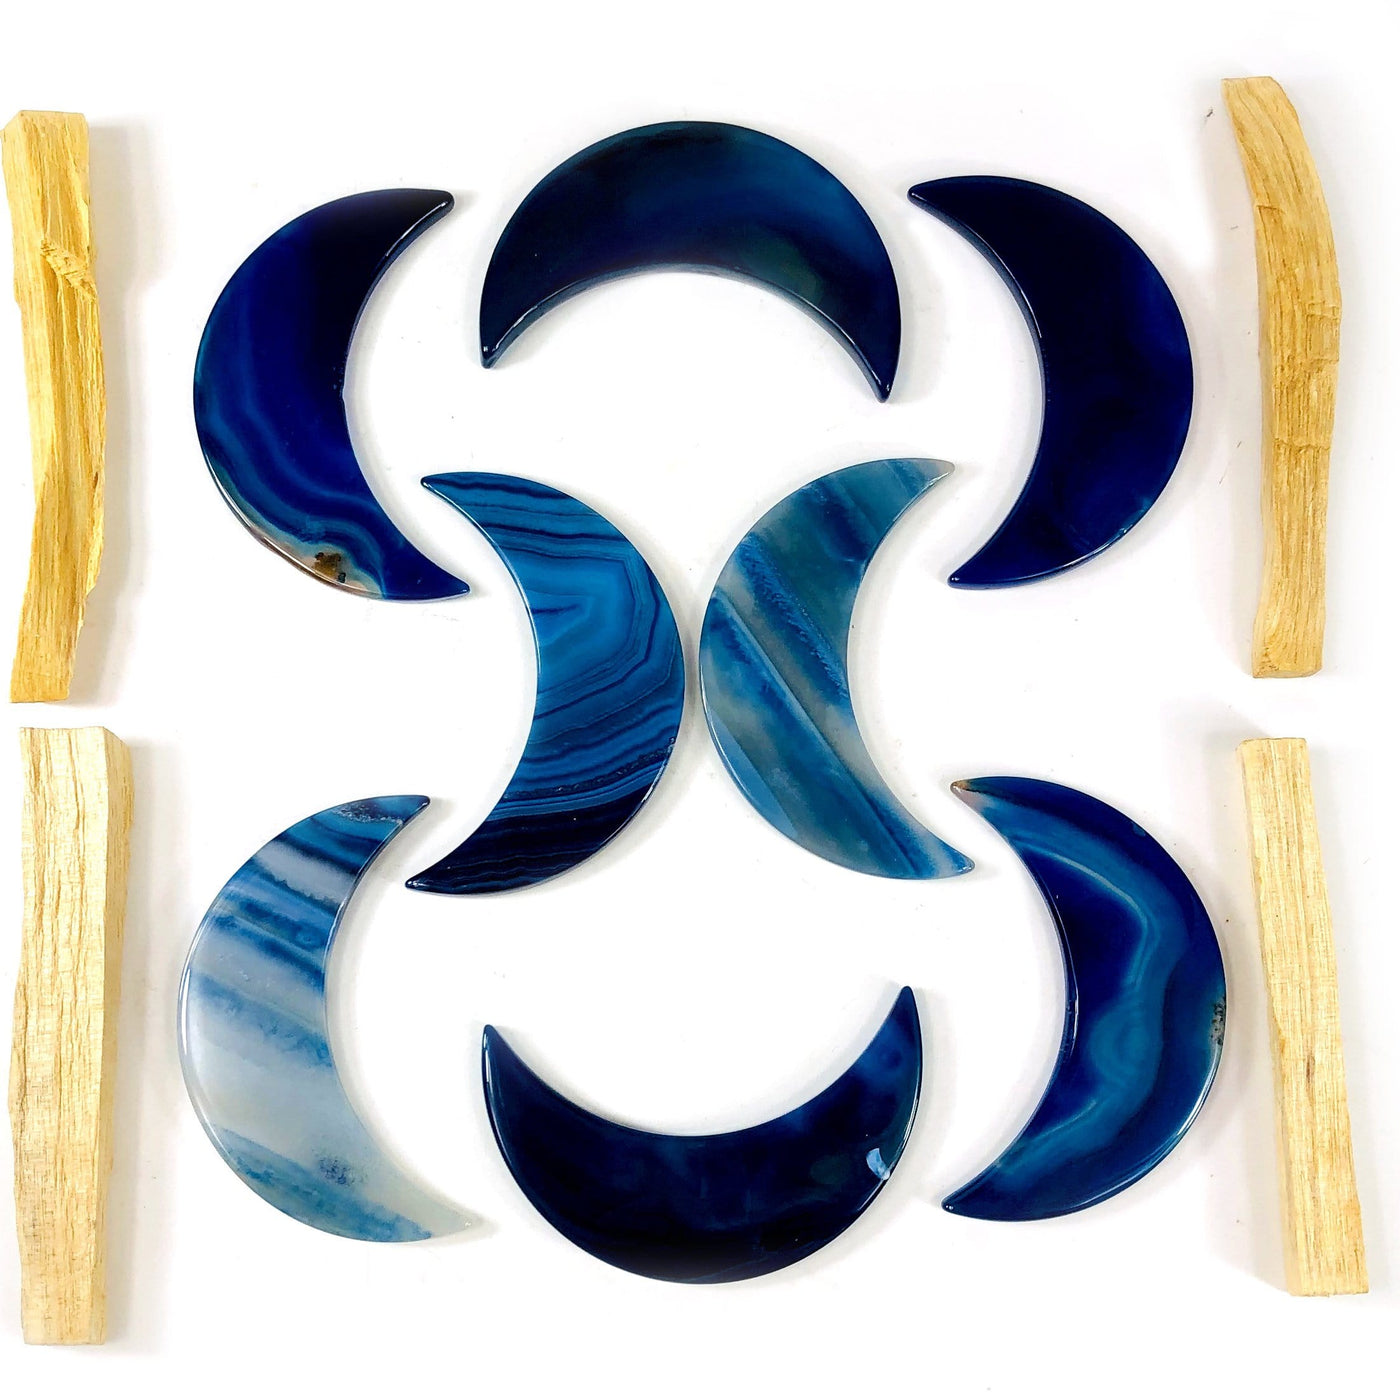 Eight blue agate moons displayed on a white surface next to palo santo.